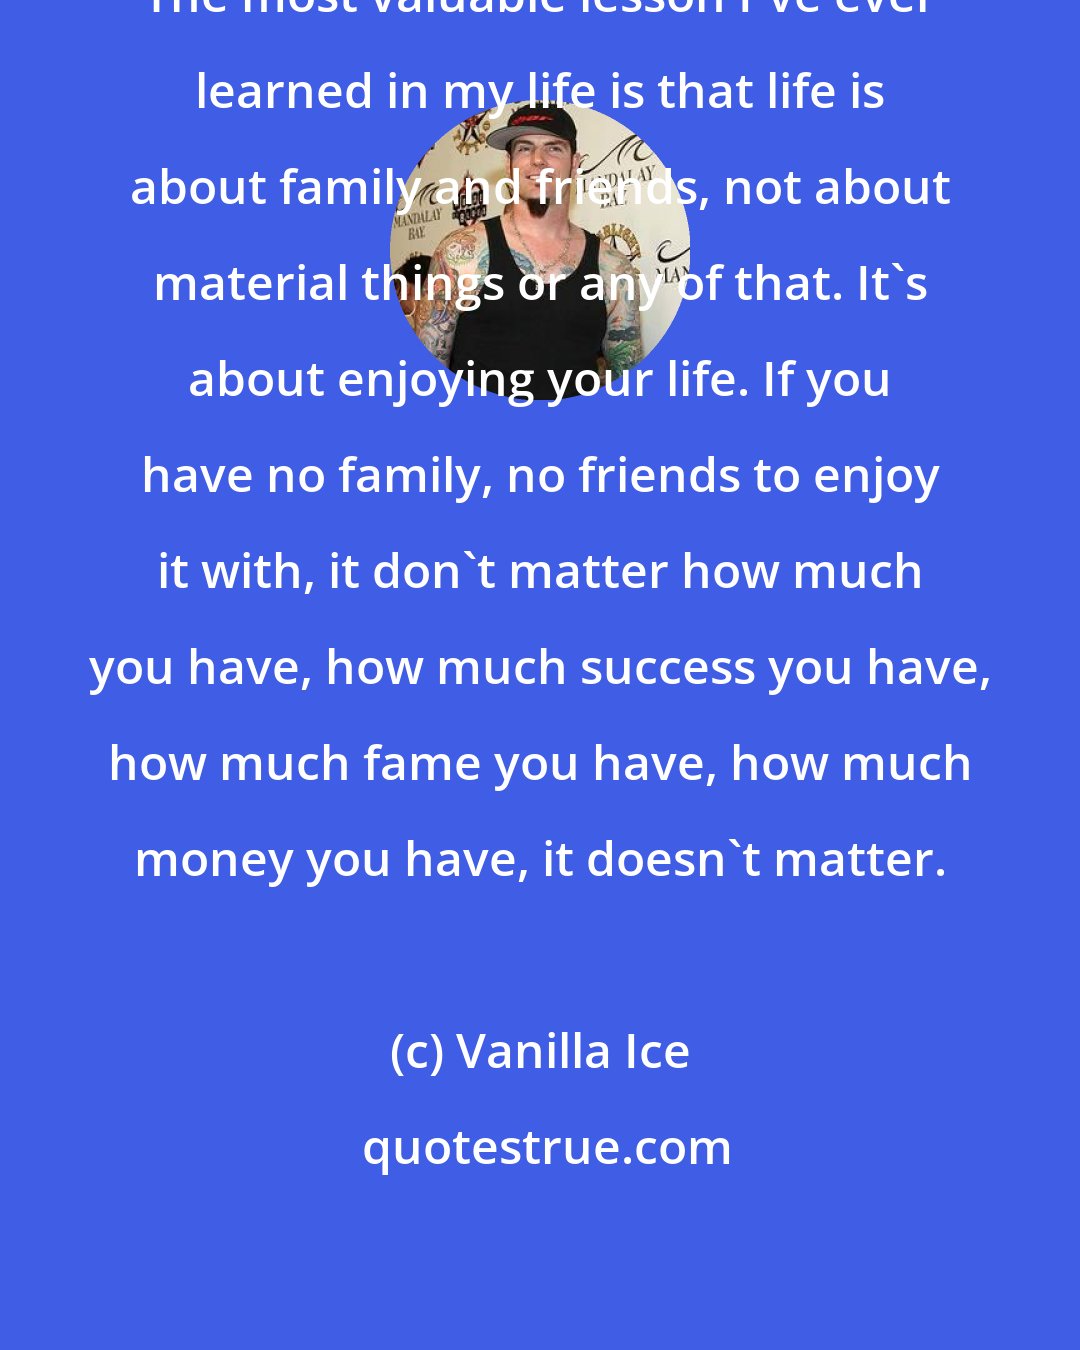 Vanilla Ice: The most valuable lesson I've ever learned in my life is that life is about family and friends, not about material things or any of that. It's about enjoying your life. If you have no family, no friends to enjoy it with, it don't matter how much you have, how much success you have, how much fame you have, how much money you have, it doesn't matter.